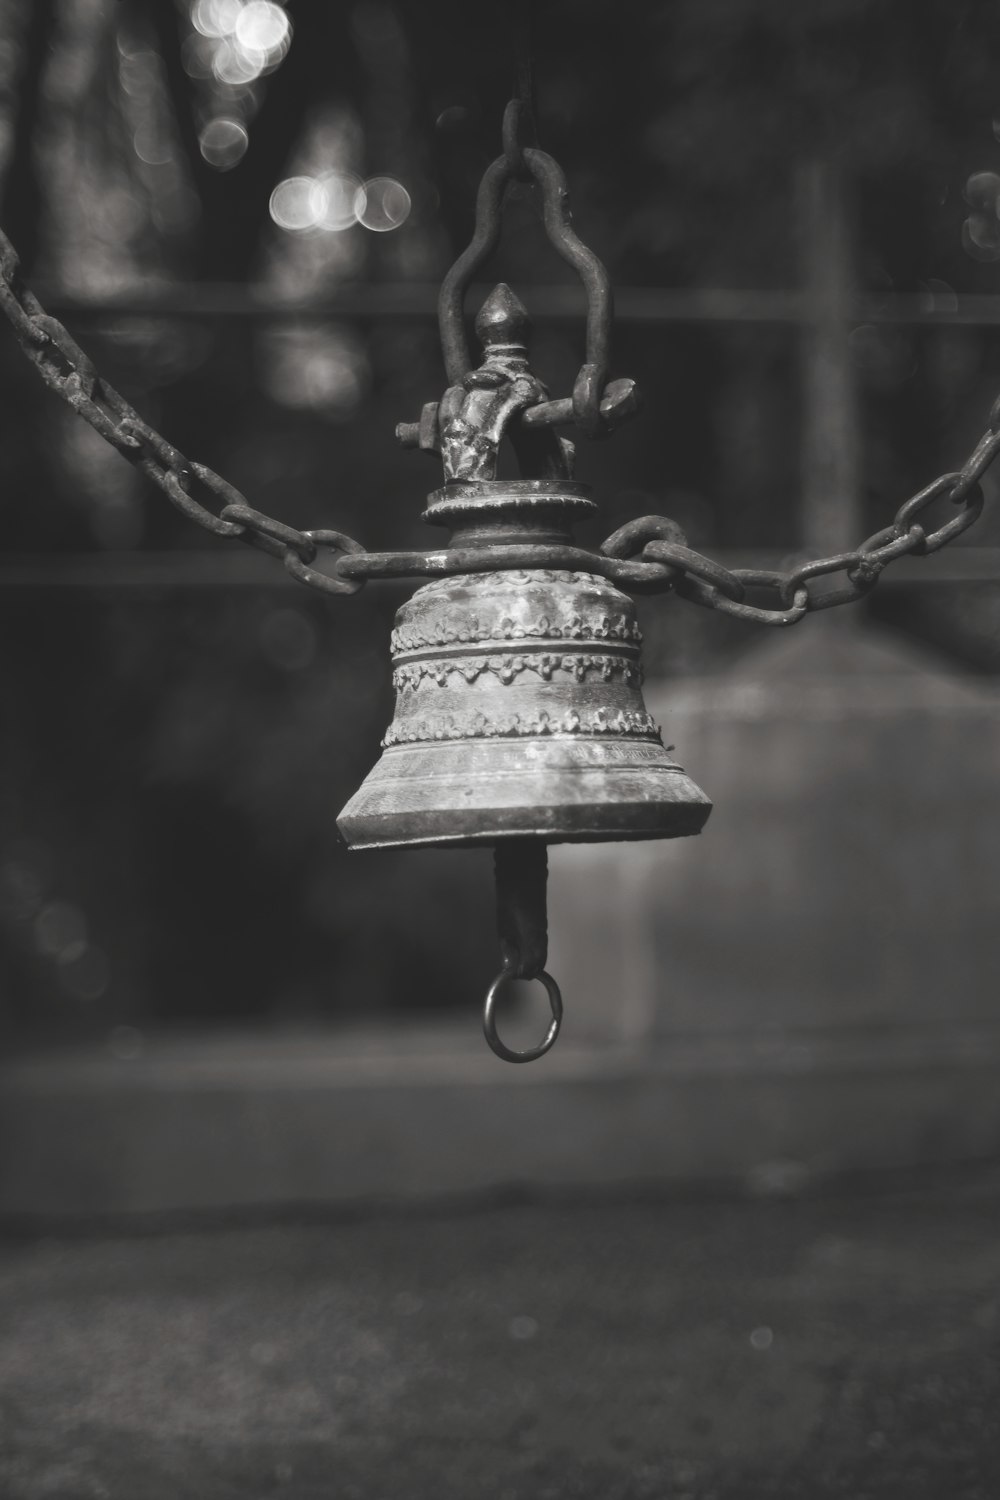 gray bell hanging on black metal wire